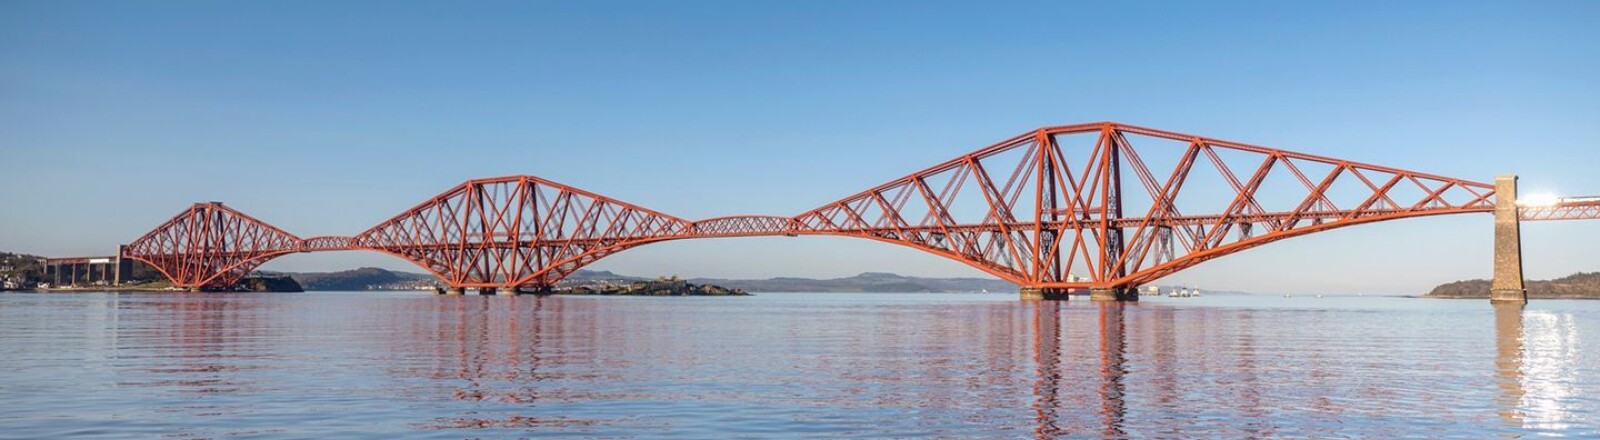 The red Forth Bridge over the Firth of Forth against a blue sky